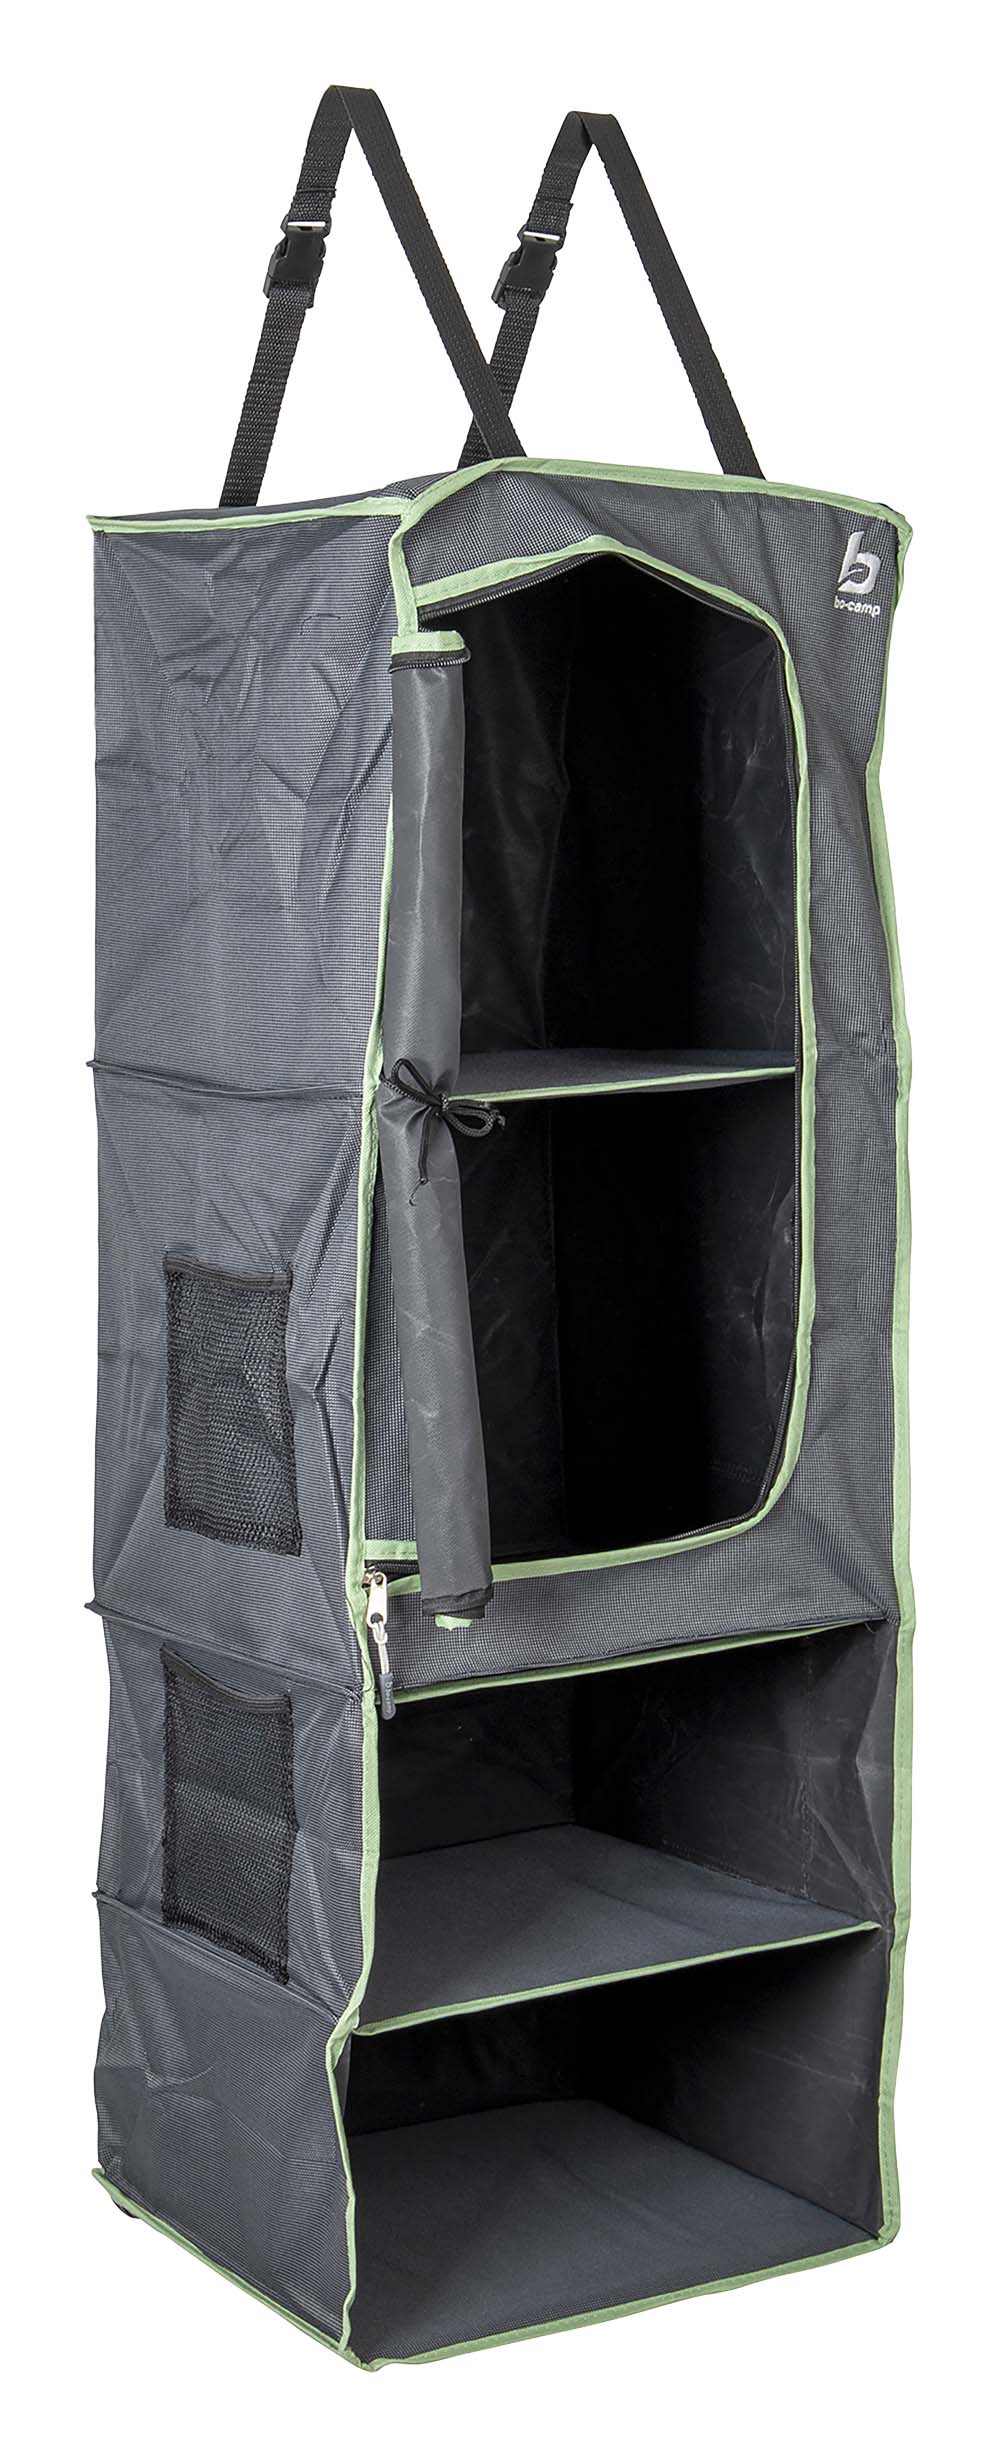 1709379 A foldable 4-compartment organiser. Has 4 spacious compartments which can be closed using roll-up doors. Can be easily mounted in various ways. This organiser can be hung with straps. The loops at the bottom provide for extra stability. Made of extra strong 600D Two Tone polyester.